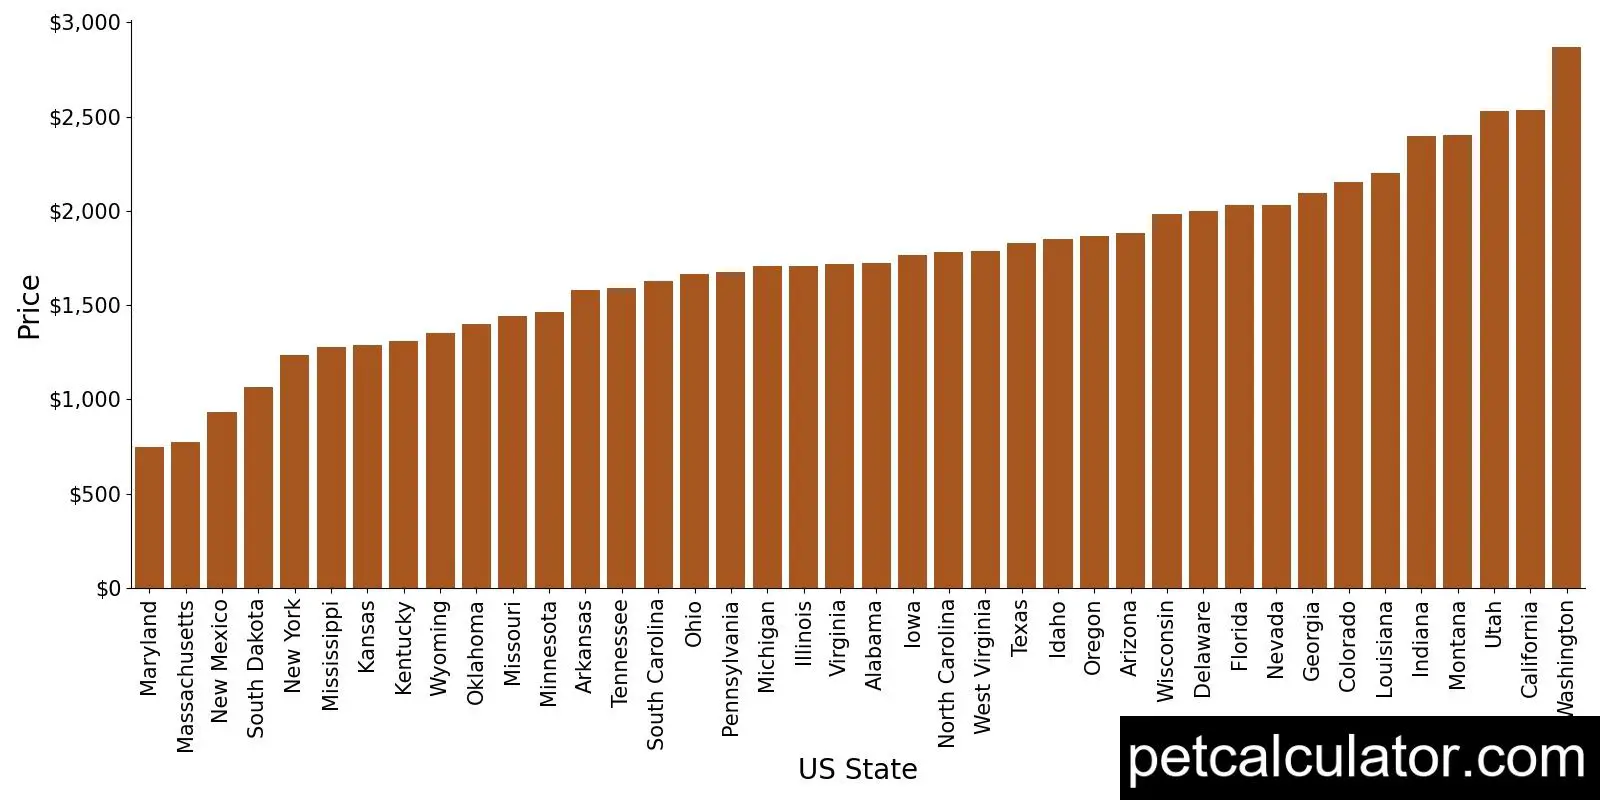 Price of Aussiedoodle by US State 